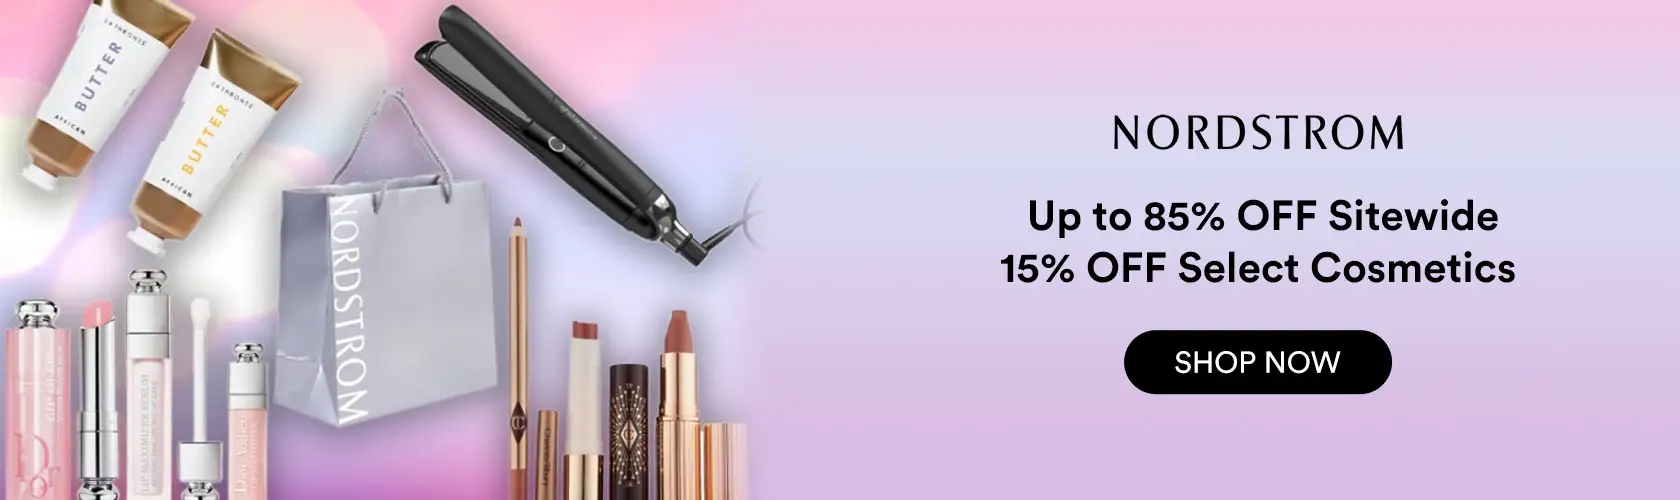 Nordstrom: Up to 85% OFF Sitewide + 15% OFF Select Cosmetics